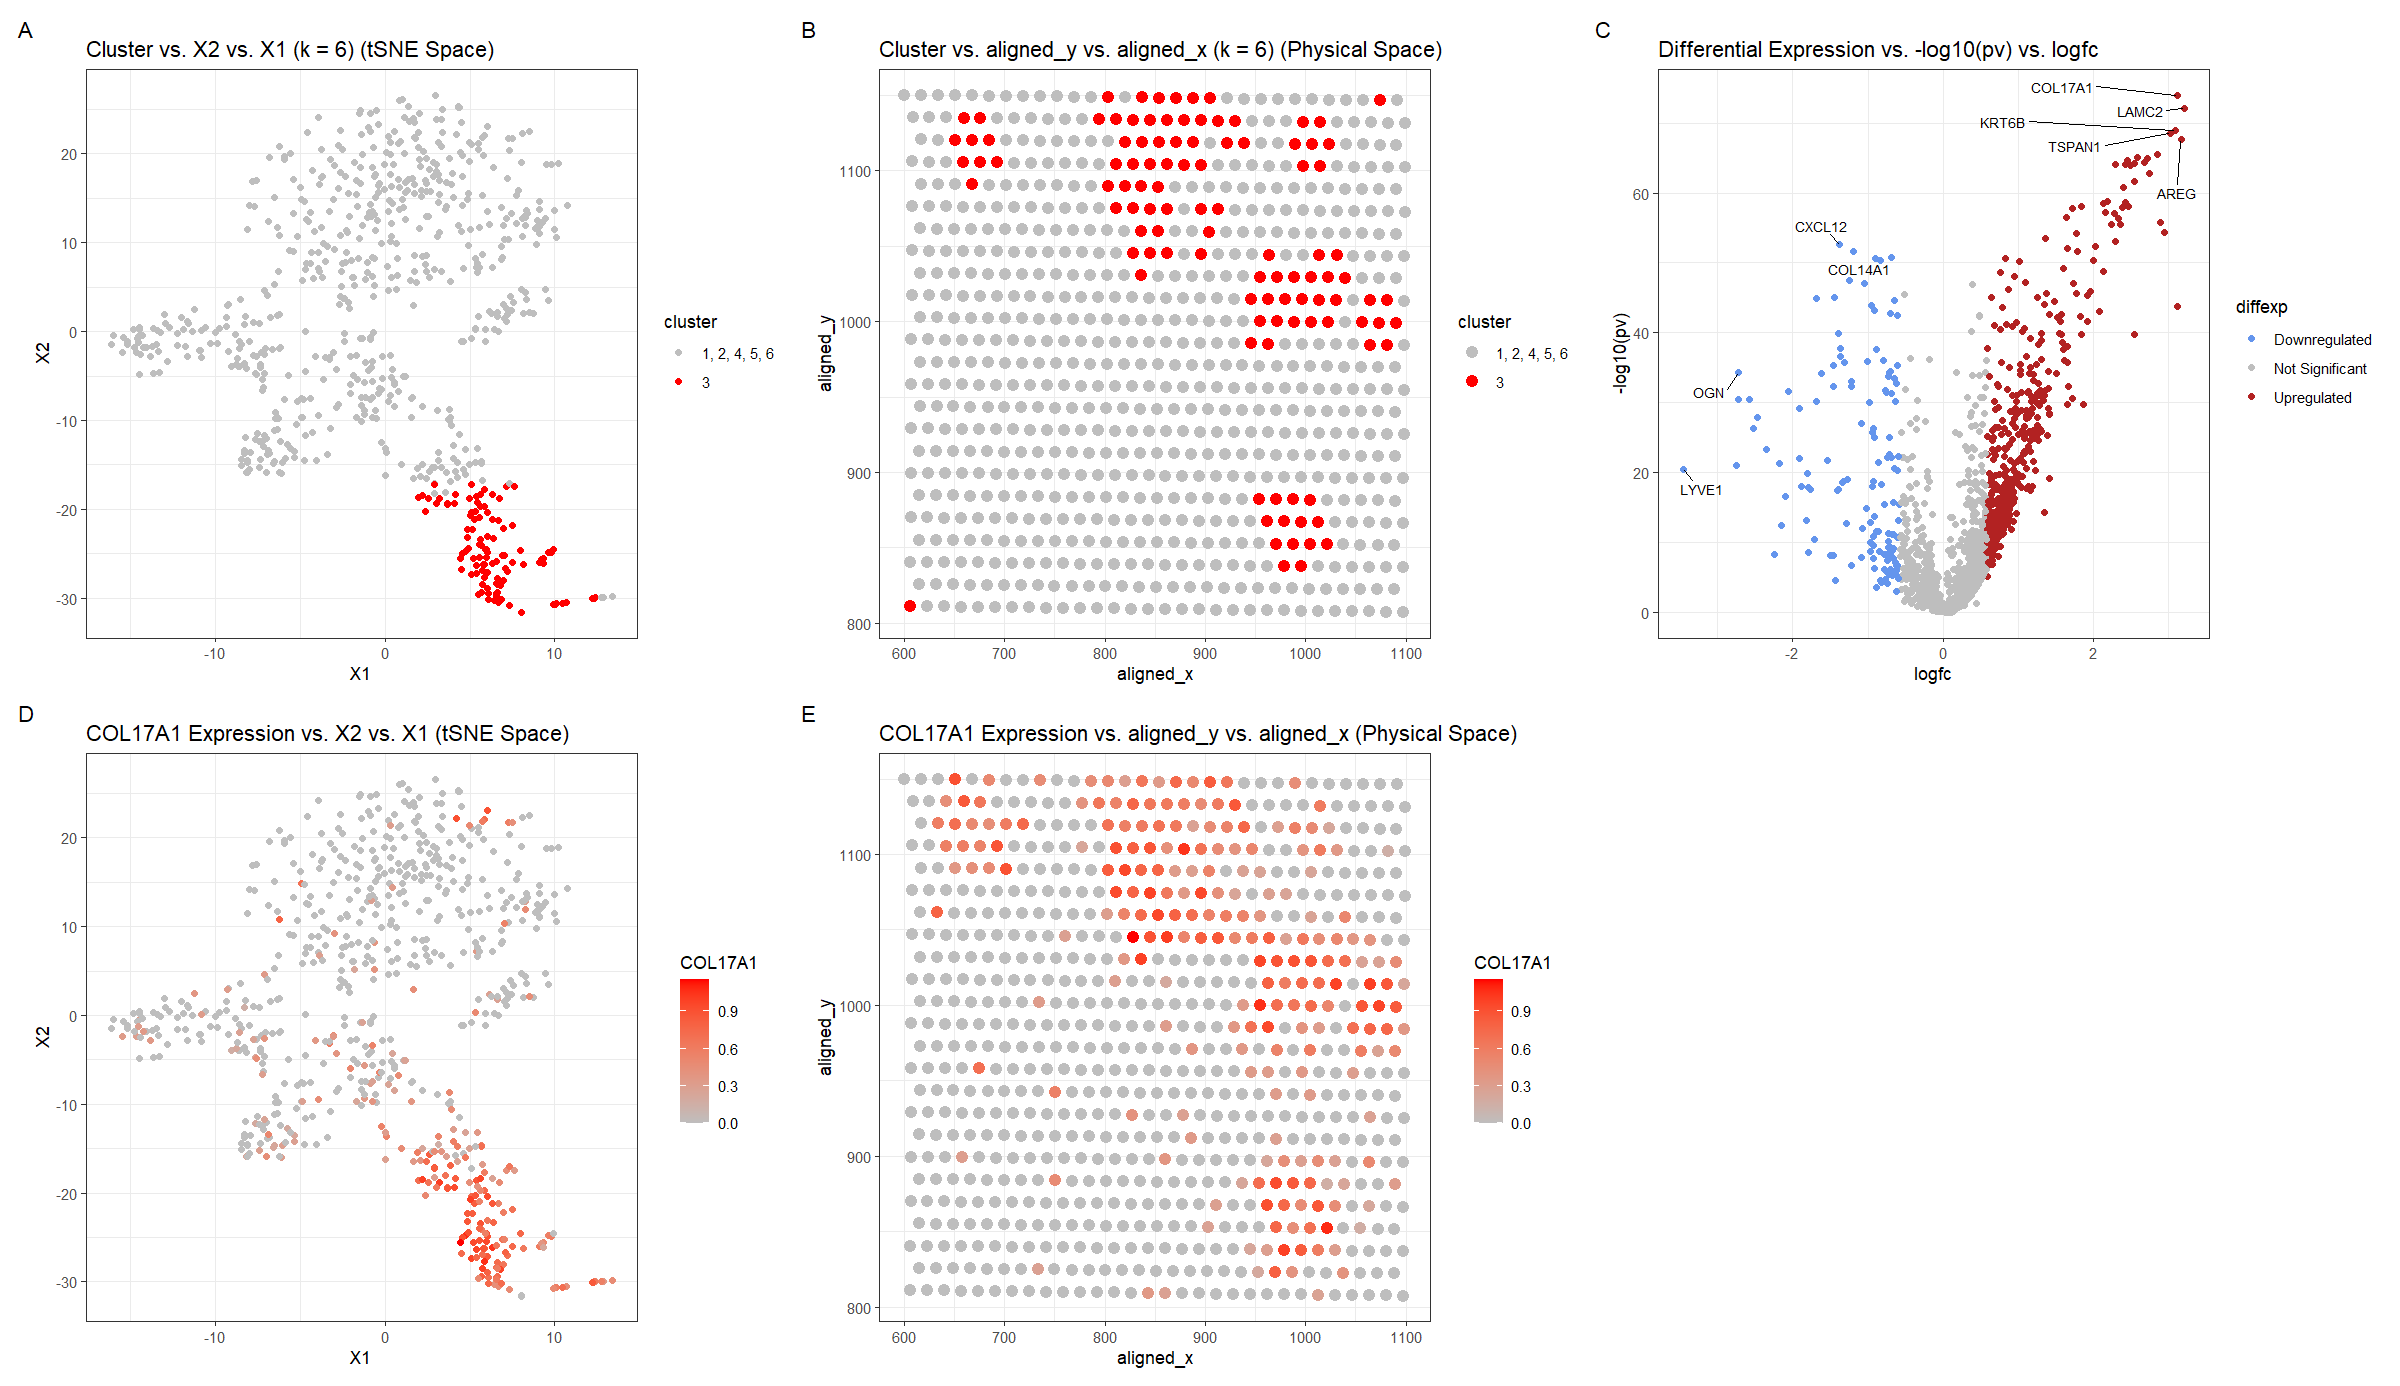 Identifying Cell-type from Breast Cancer Tissue Spatial Transcriptomics Data using K-means Clustering, tSNE, and Wilcox-test